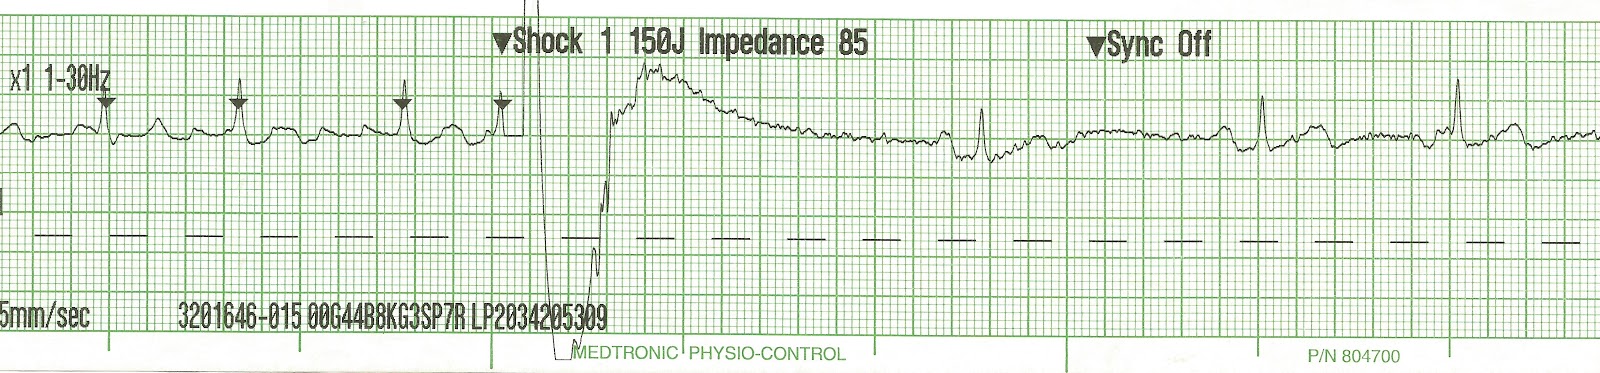 Direct Current Cardioversion